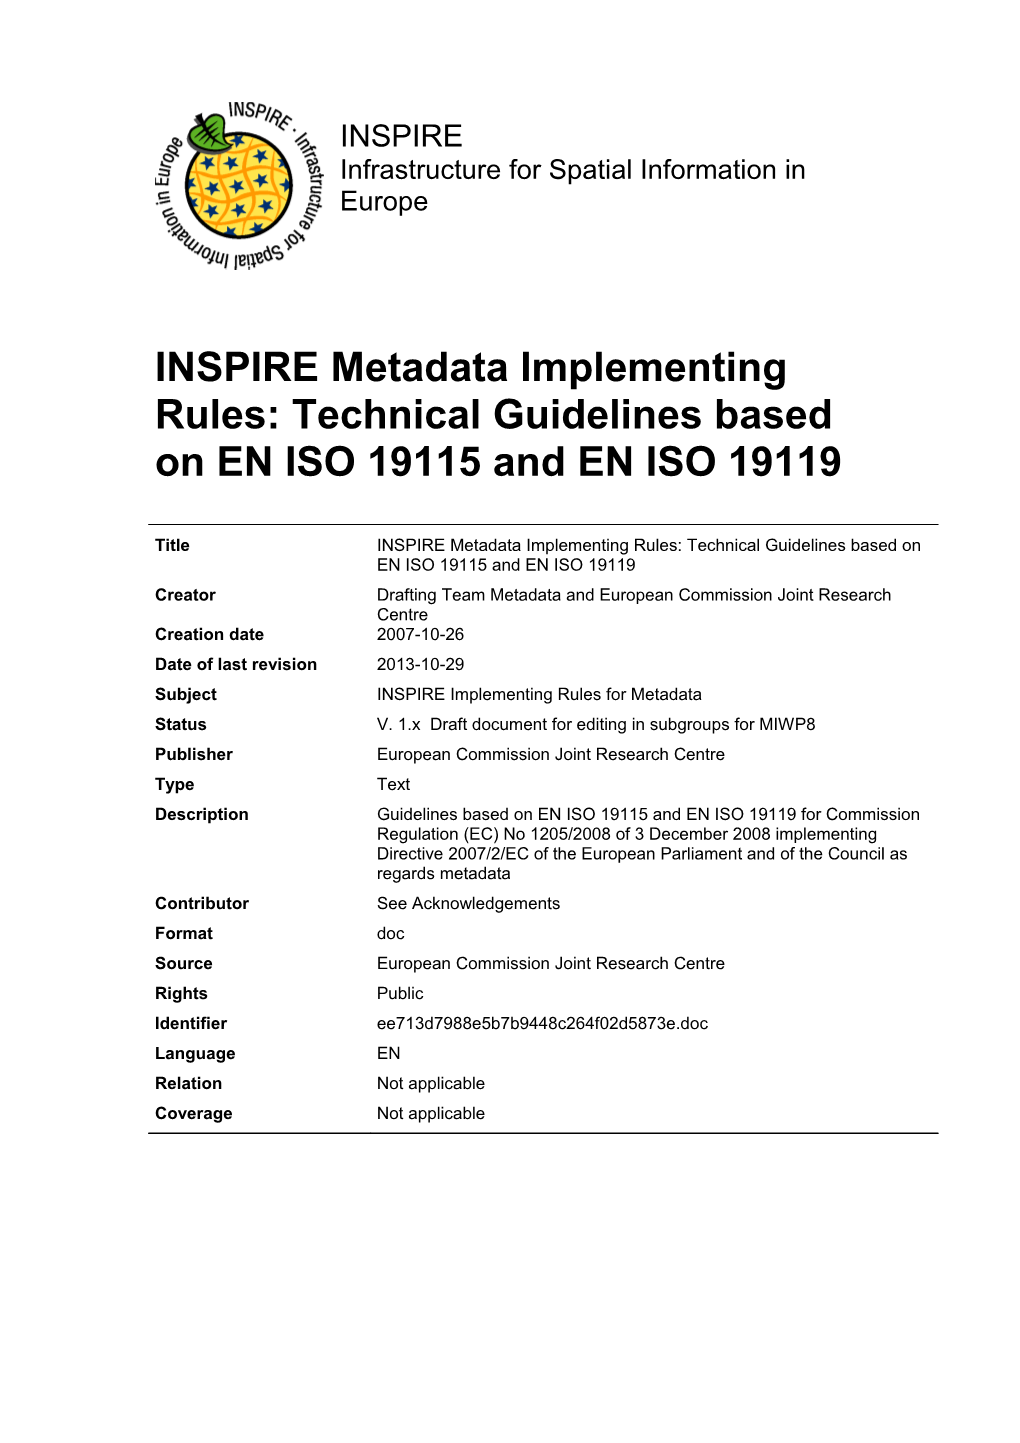 INSPIRE Metadata Implementing Rules: Technical Guidelines Based on EN ISO 19115 and EN